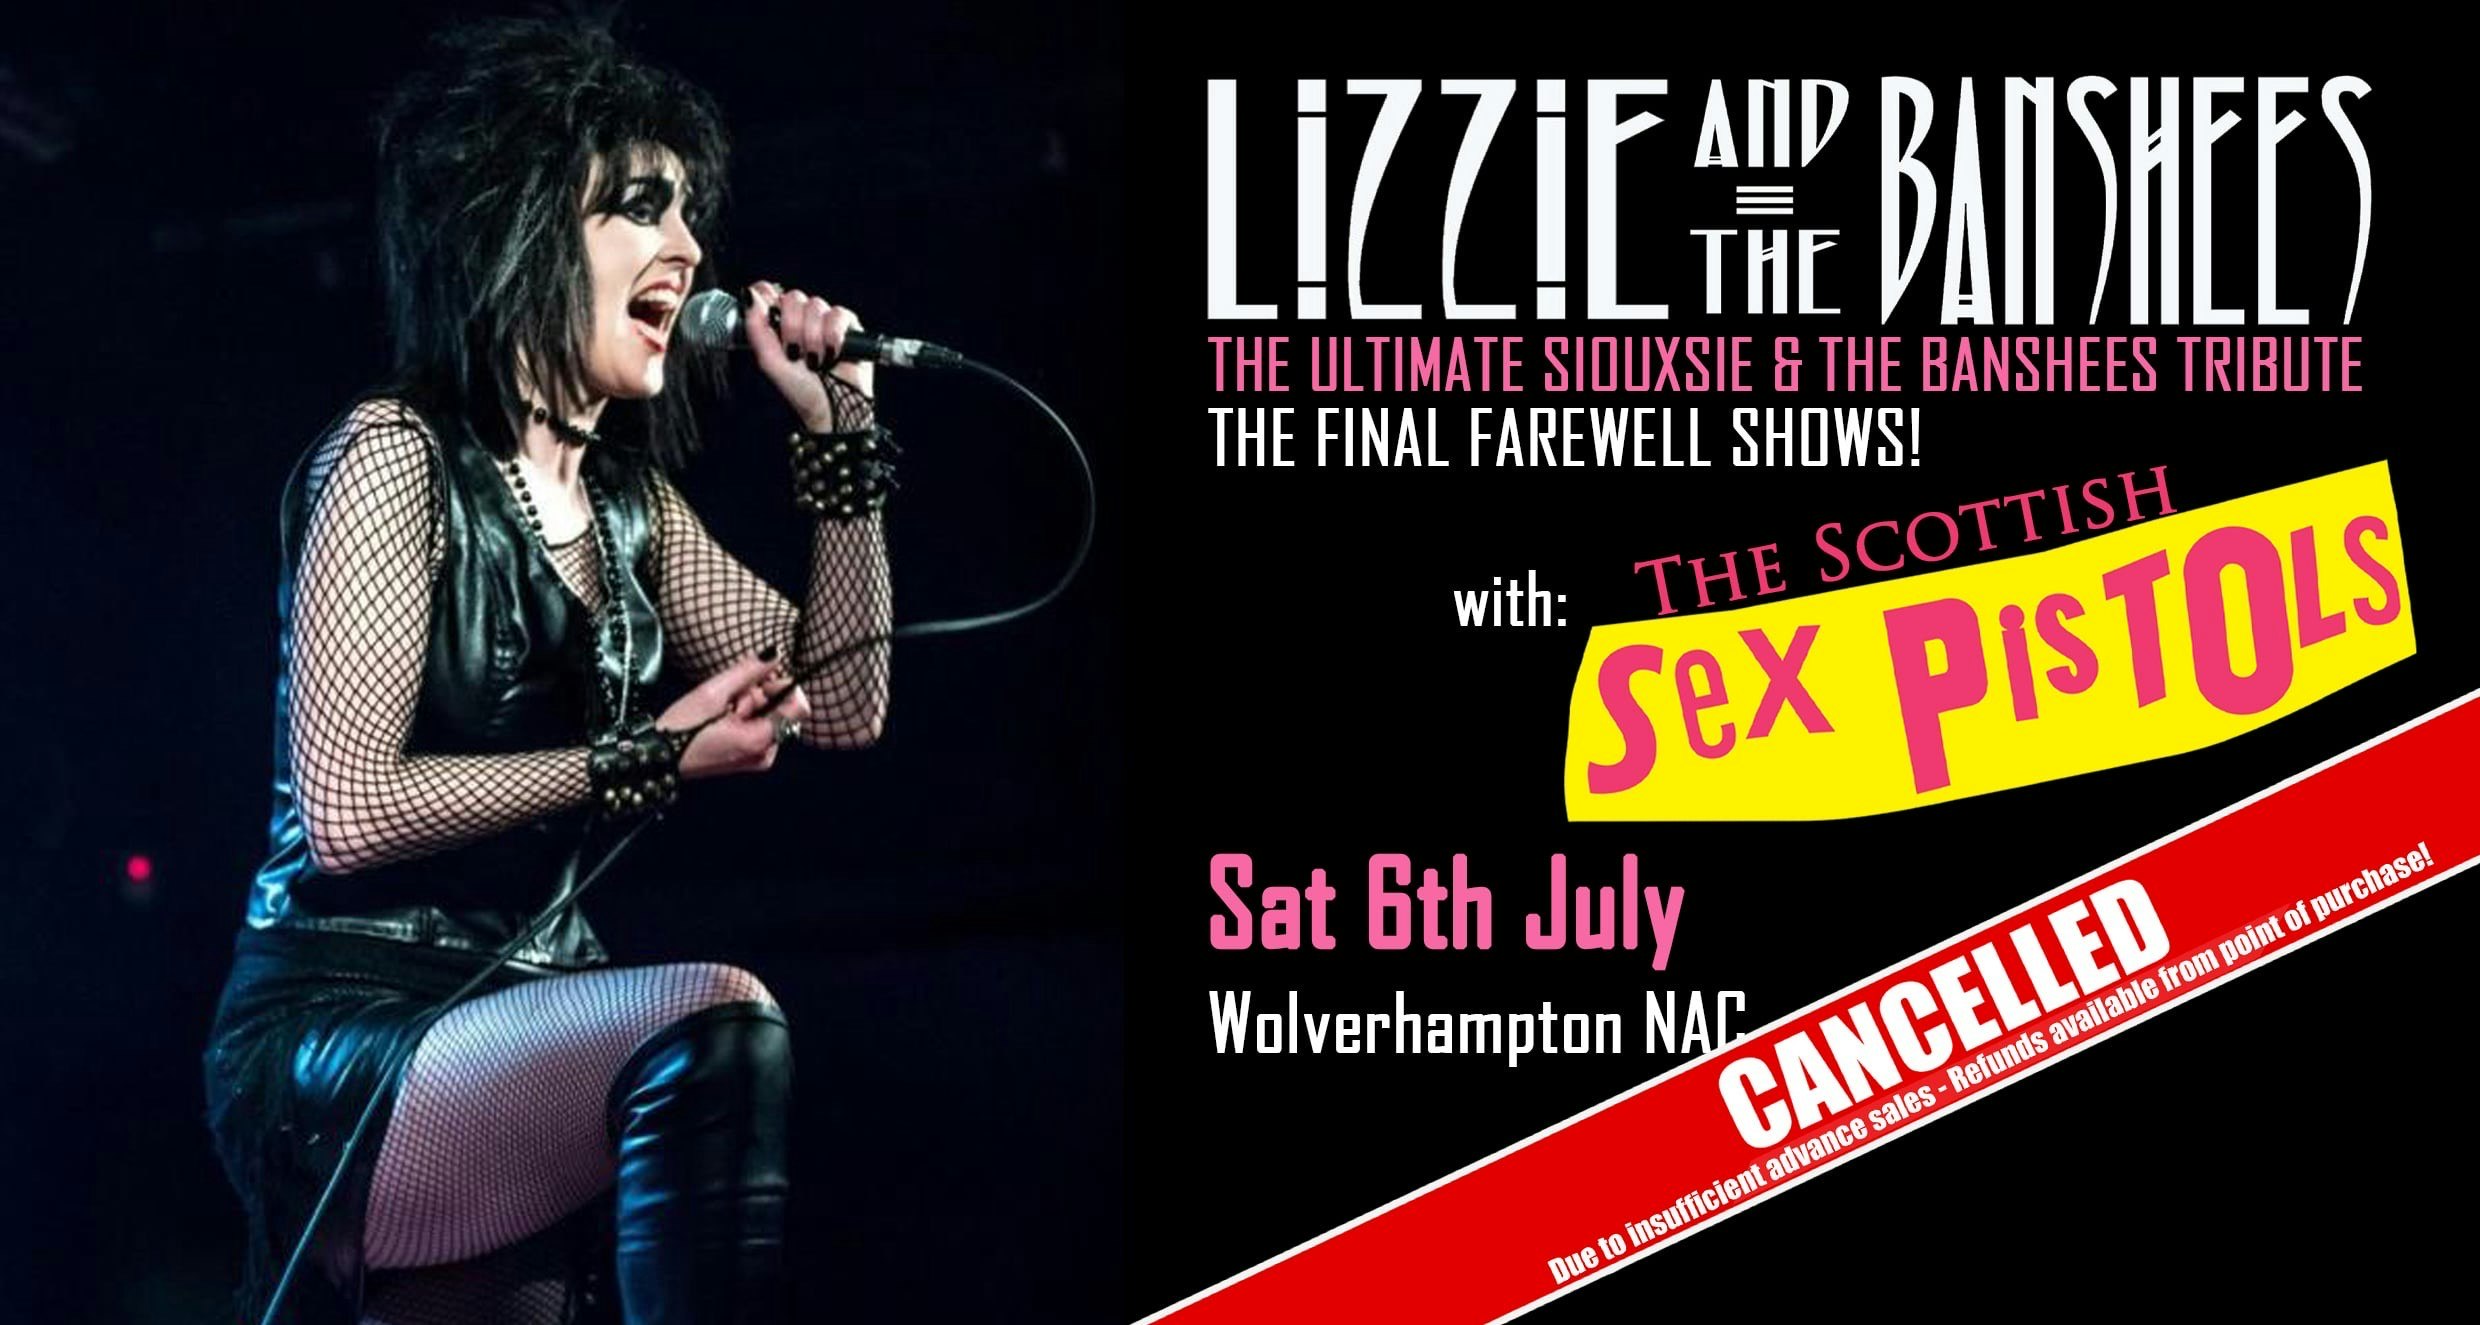 CANCELLED –  THE SCOTTISH SEX PISTOLS + LIZZIE & THE BANSHEES & REPTILE HOUSE